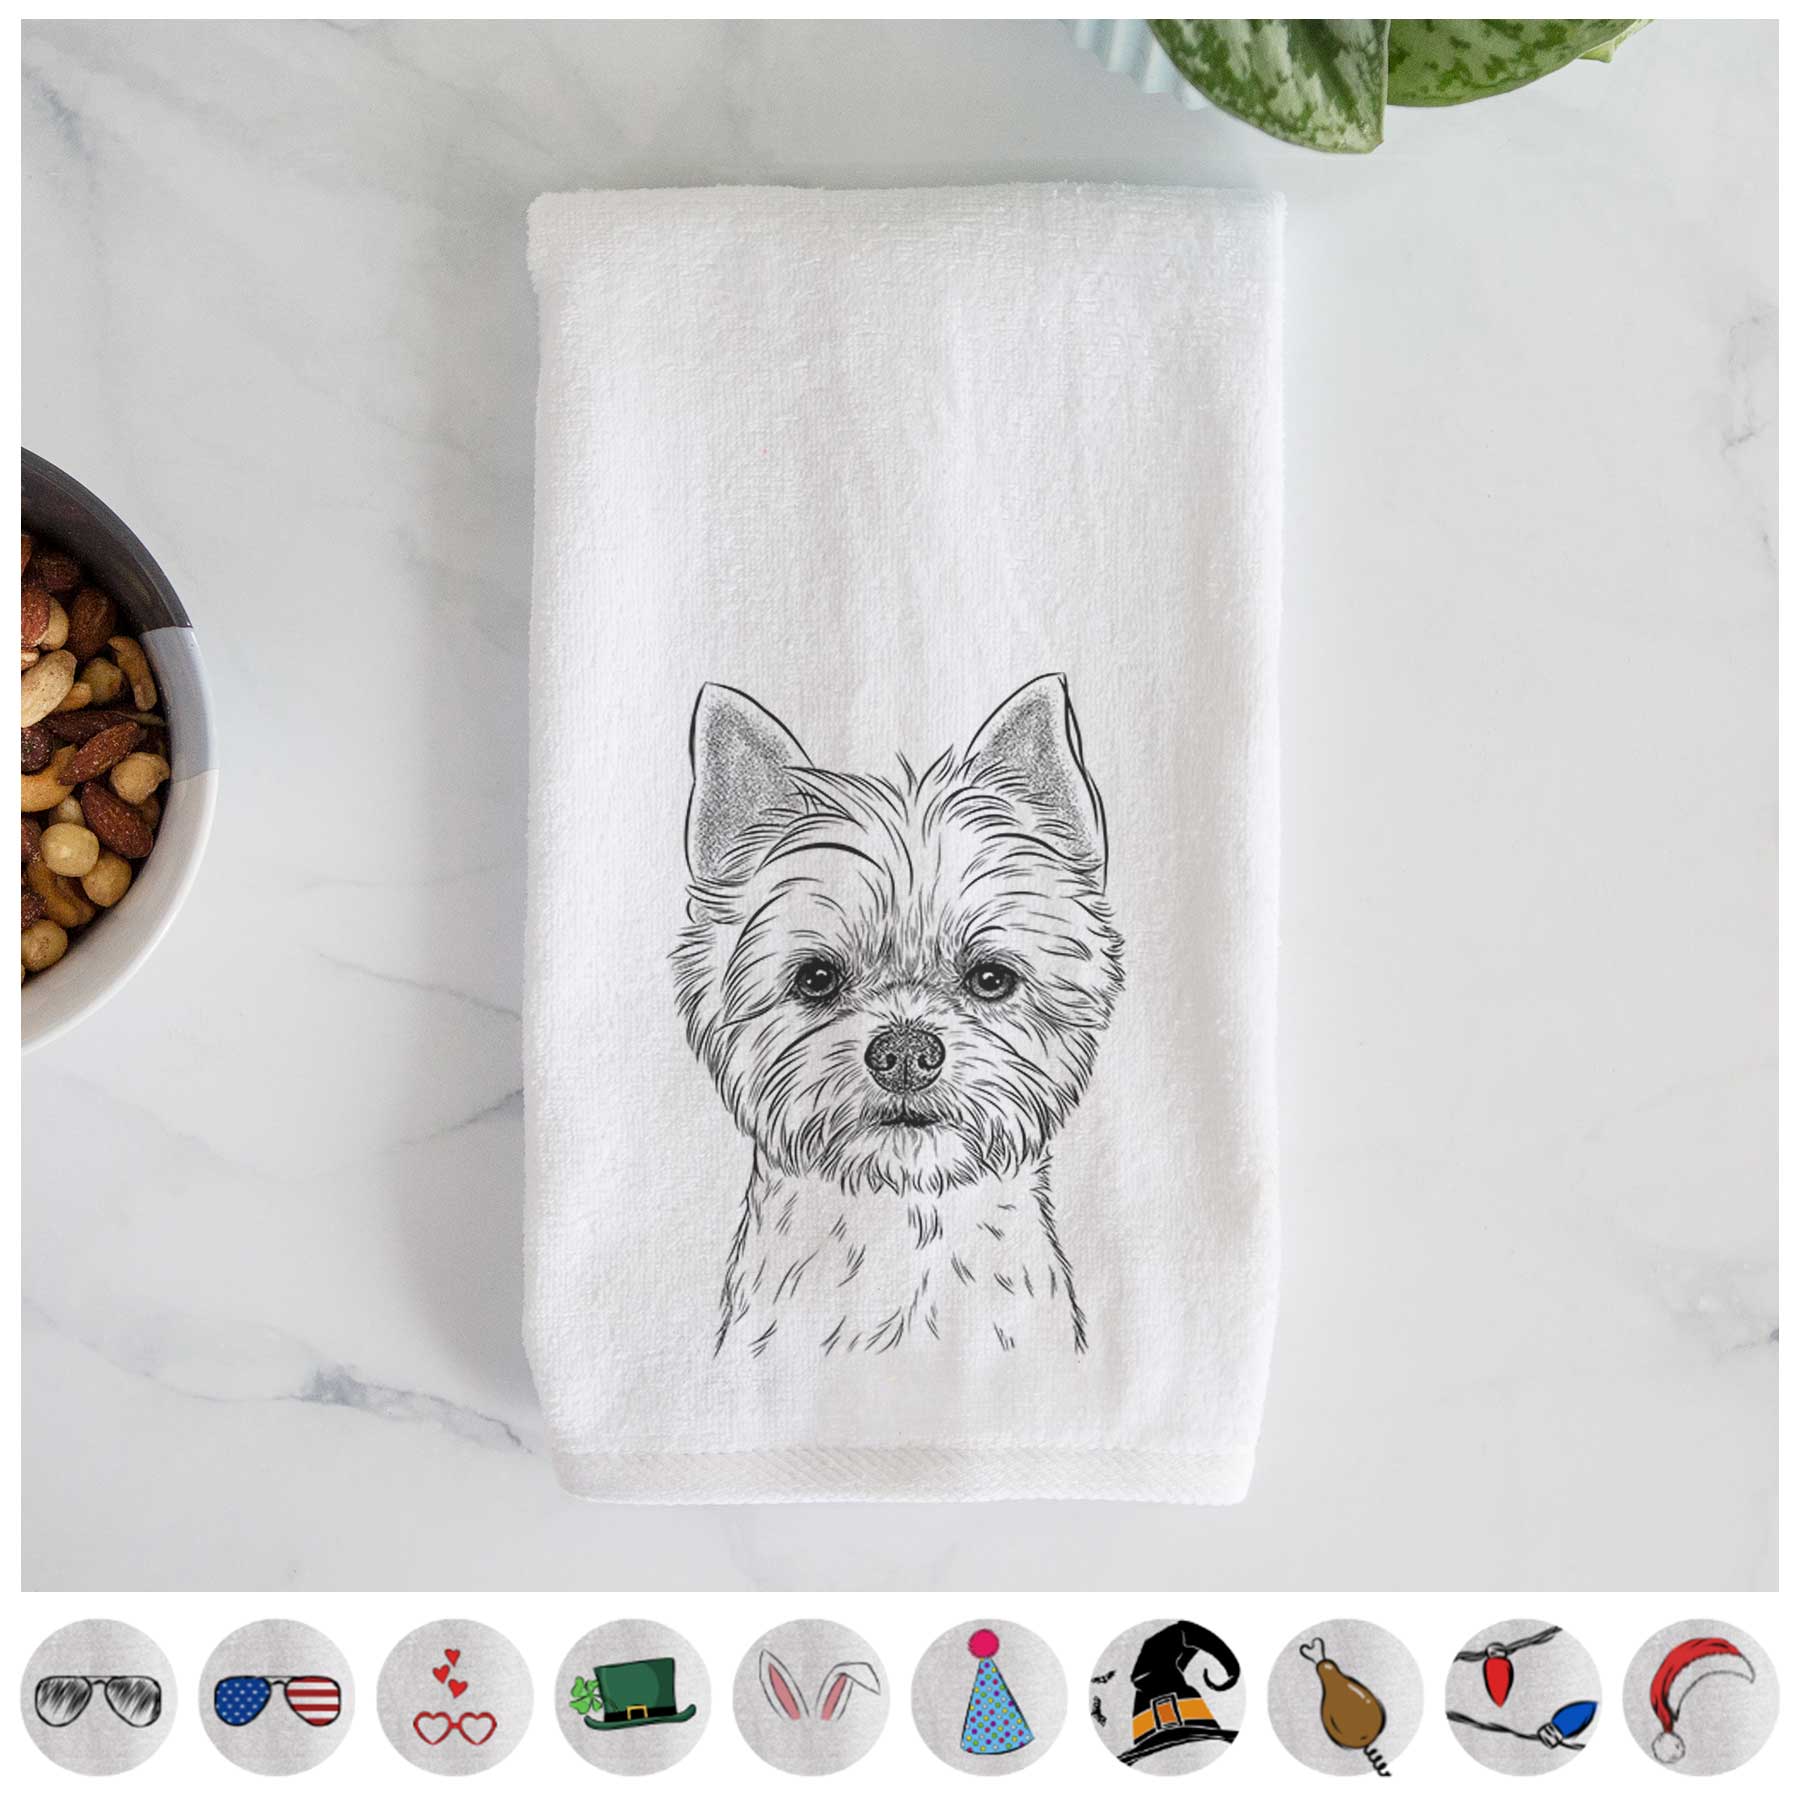 Chewy the Yorkshire Terrier Hand Towel